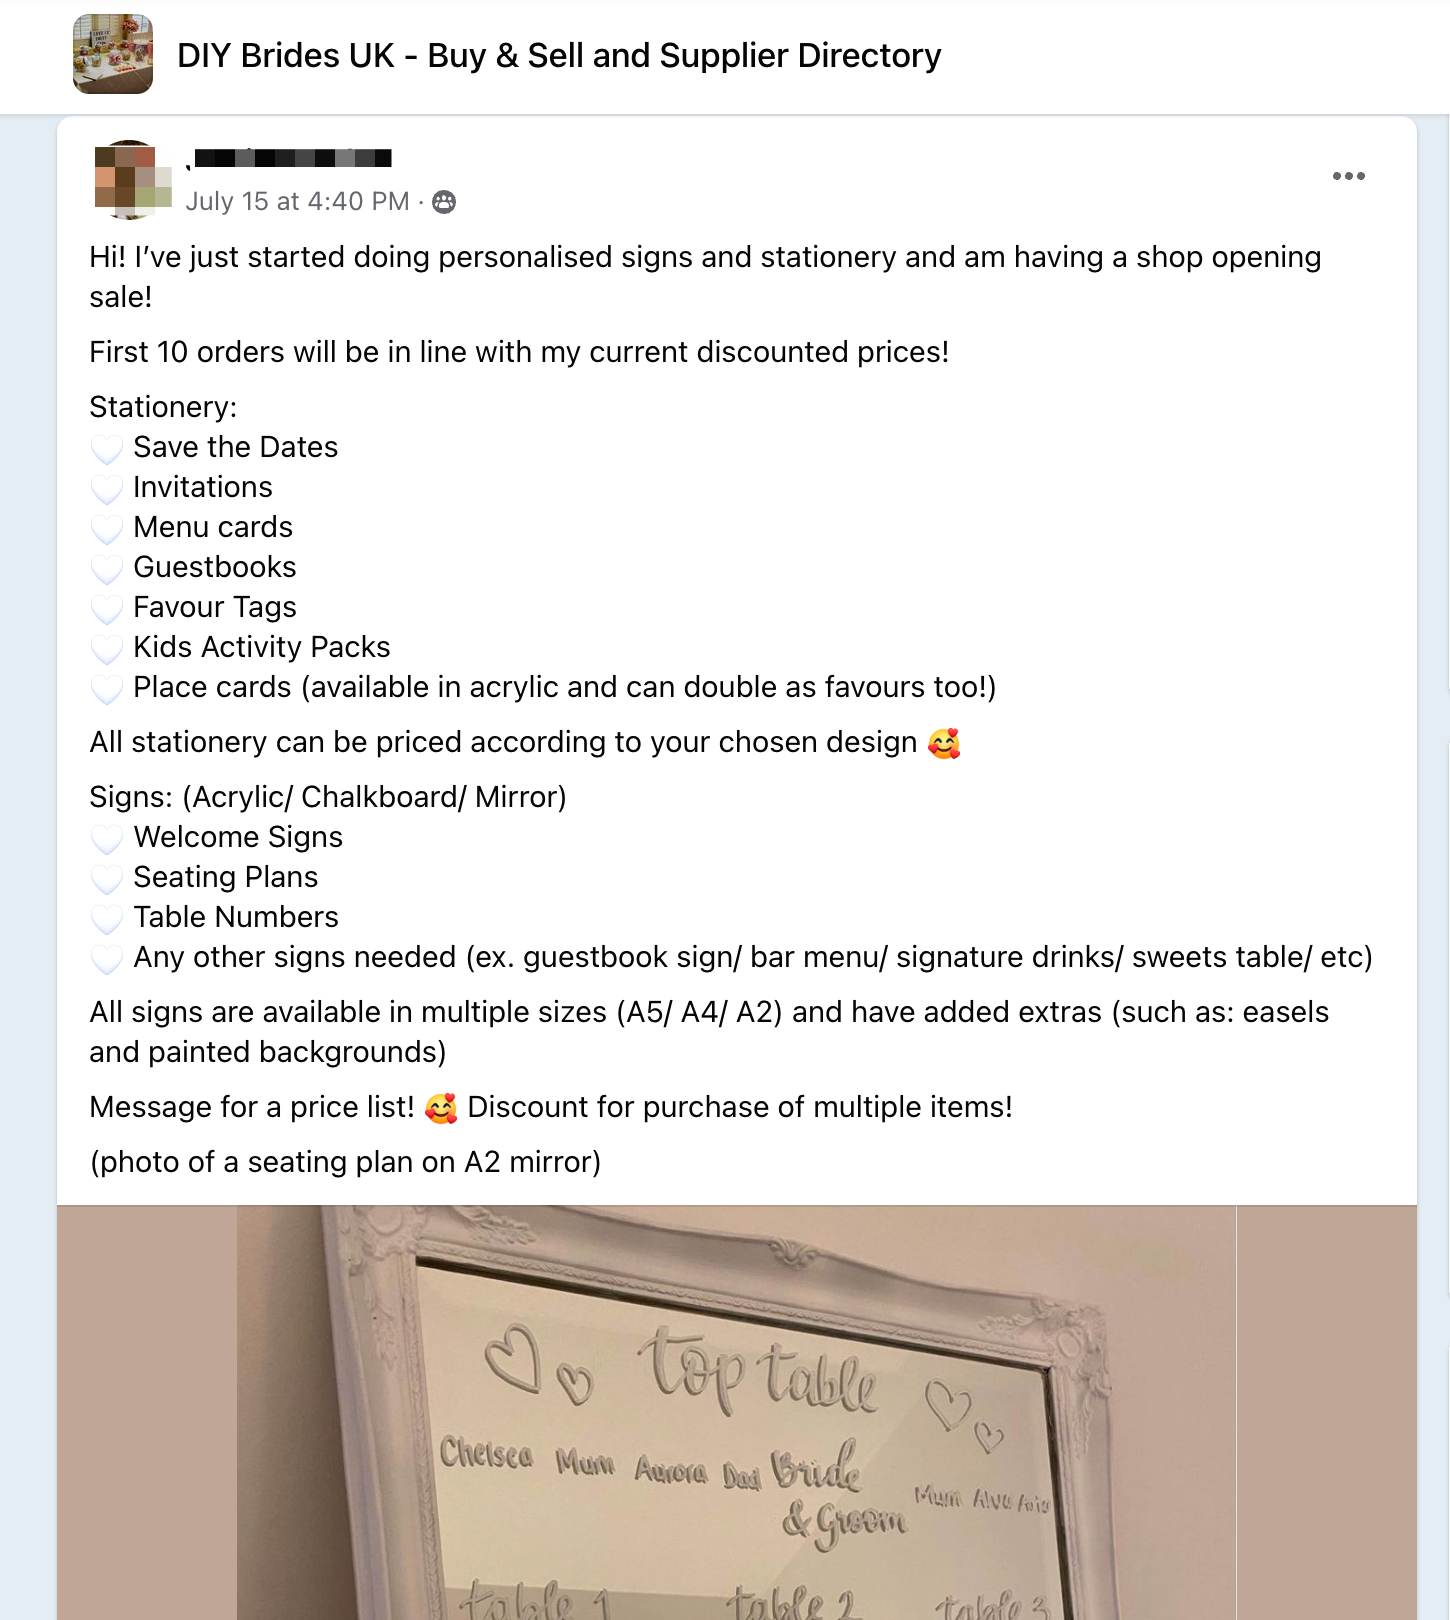 Entrepreneur promoting their wedding stationery in a Facebook group for UK brides. 